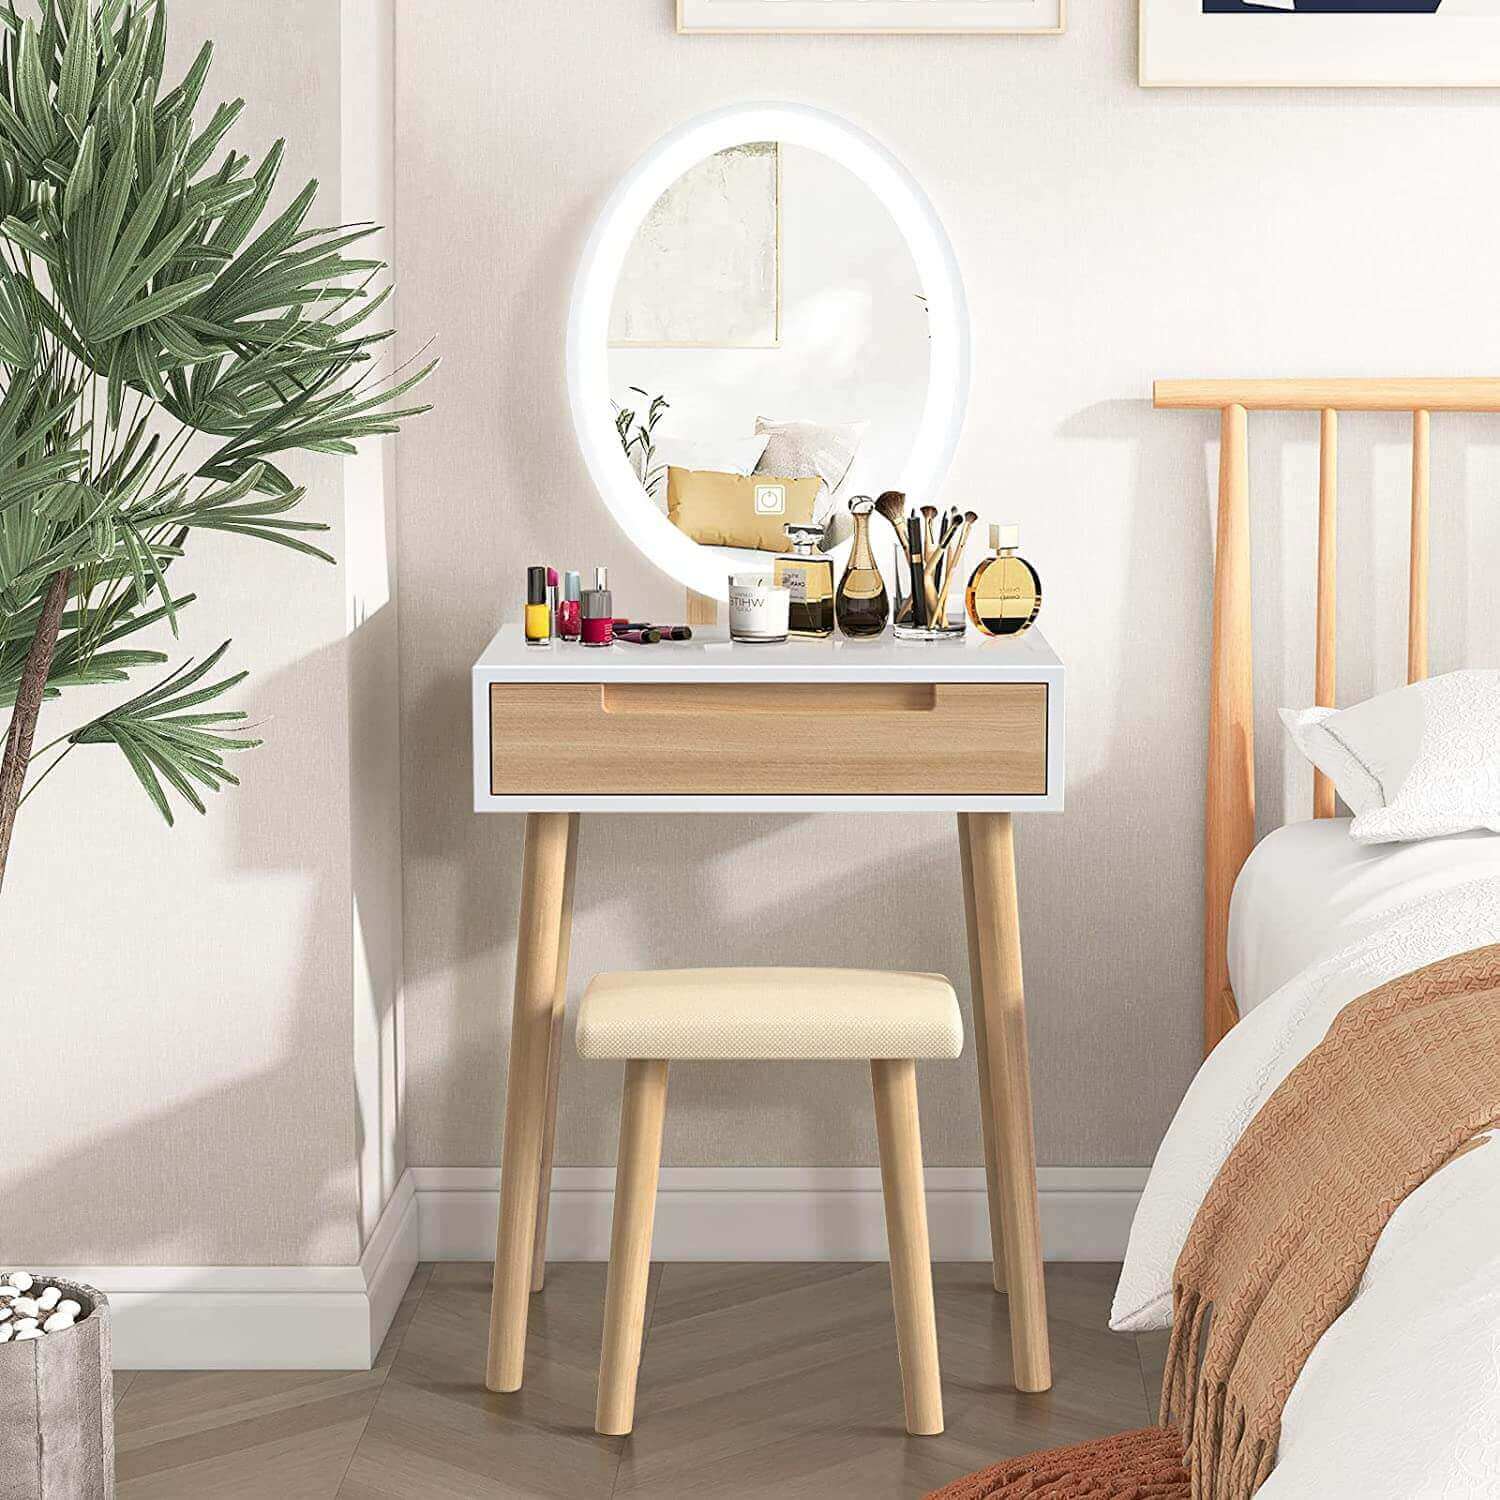 Elecwish Makeup Vanity Table Set with 3 Adjustable Lighted Mirror Stool HW1151WD display in the bedroom